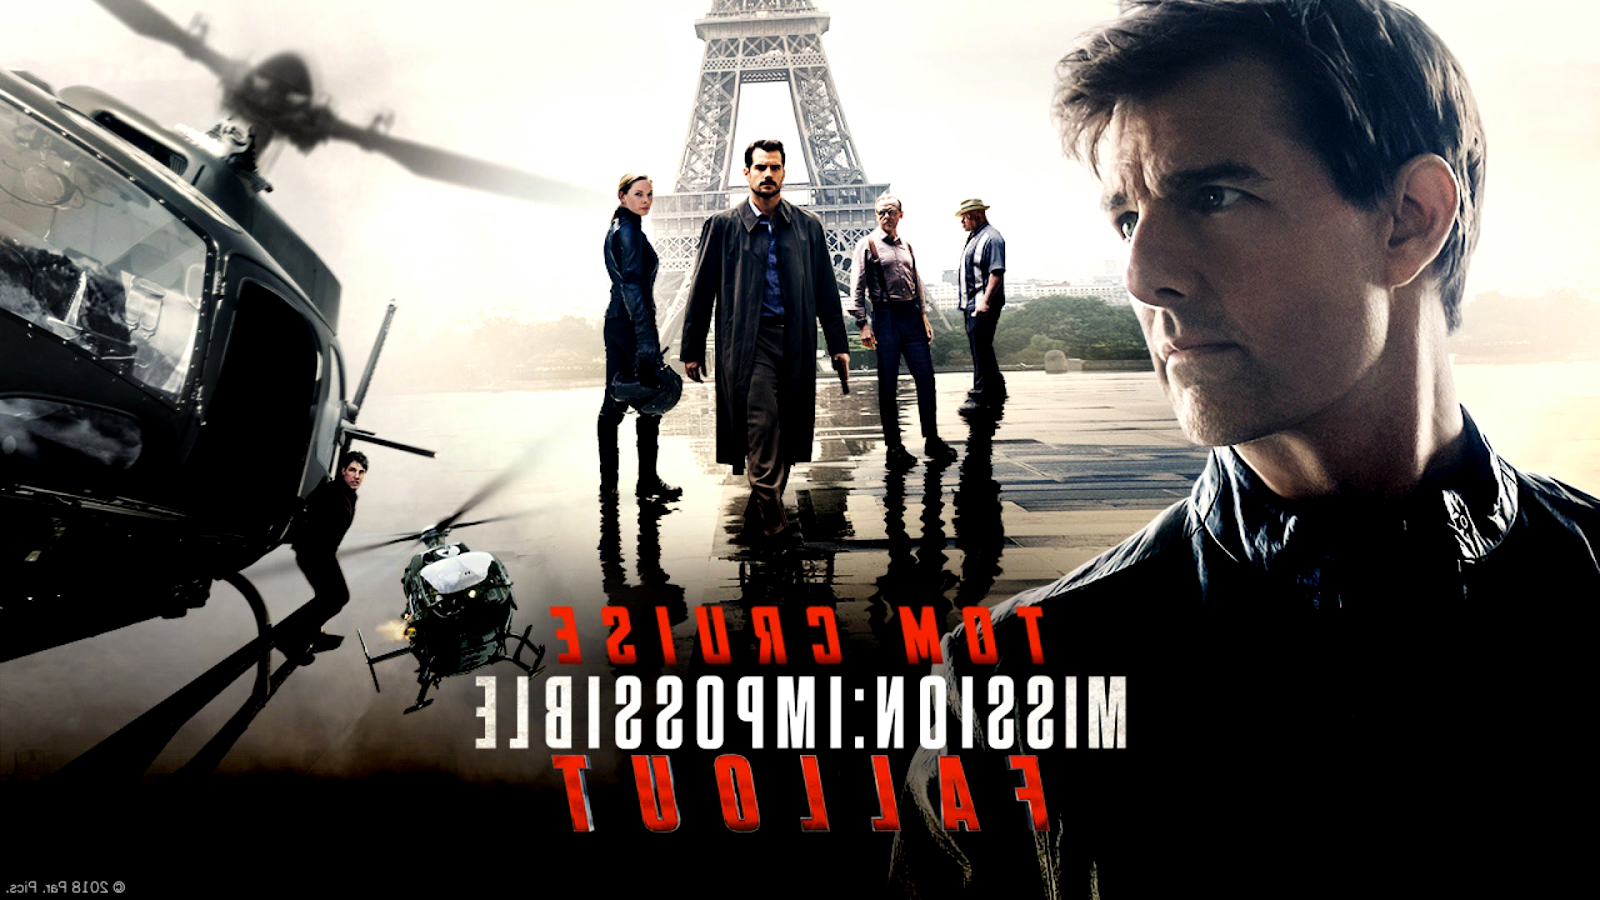 Mission Impossible 6 Fallout Poster Wallpapers